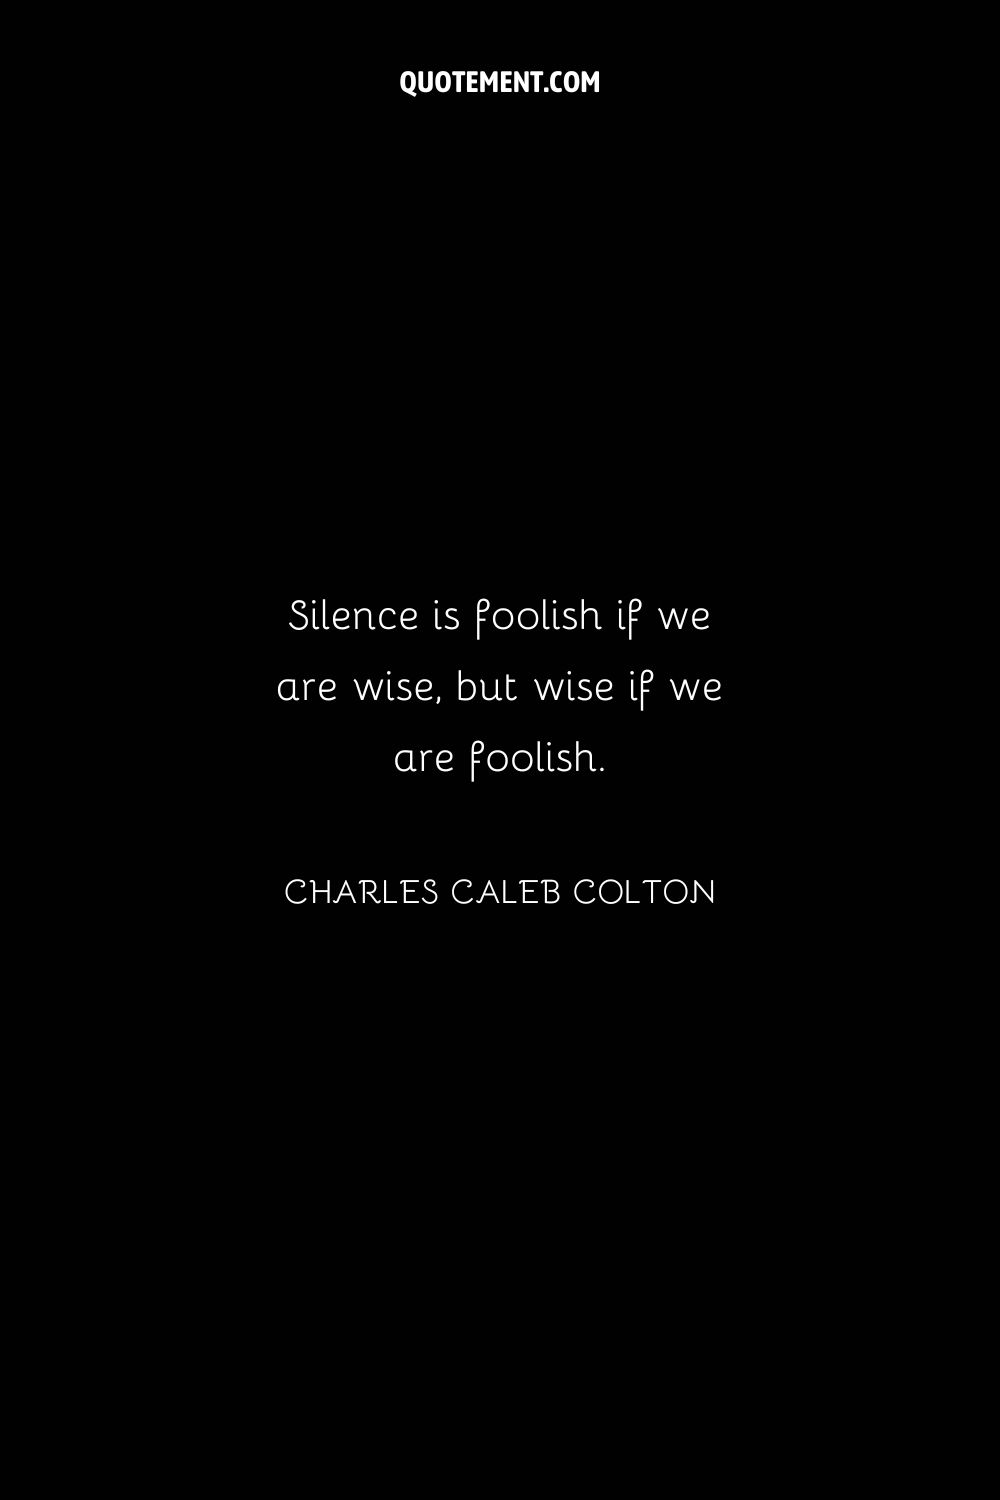 Silence is foolish if we are wise, but wise if we are foolish